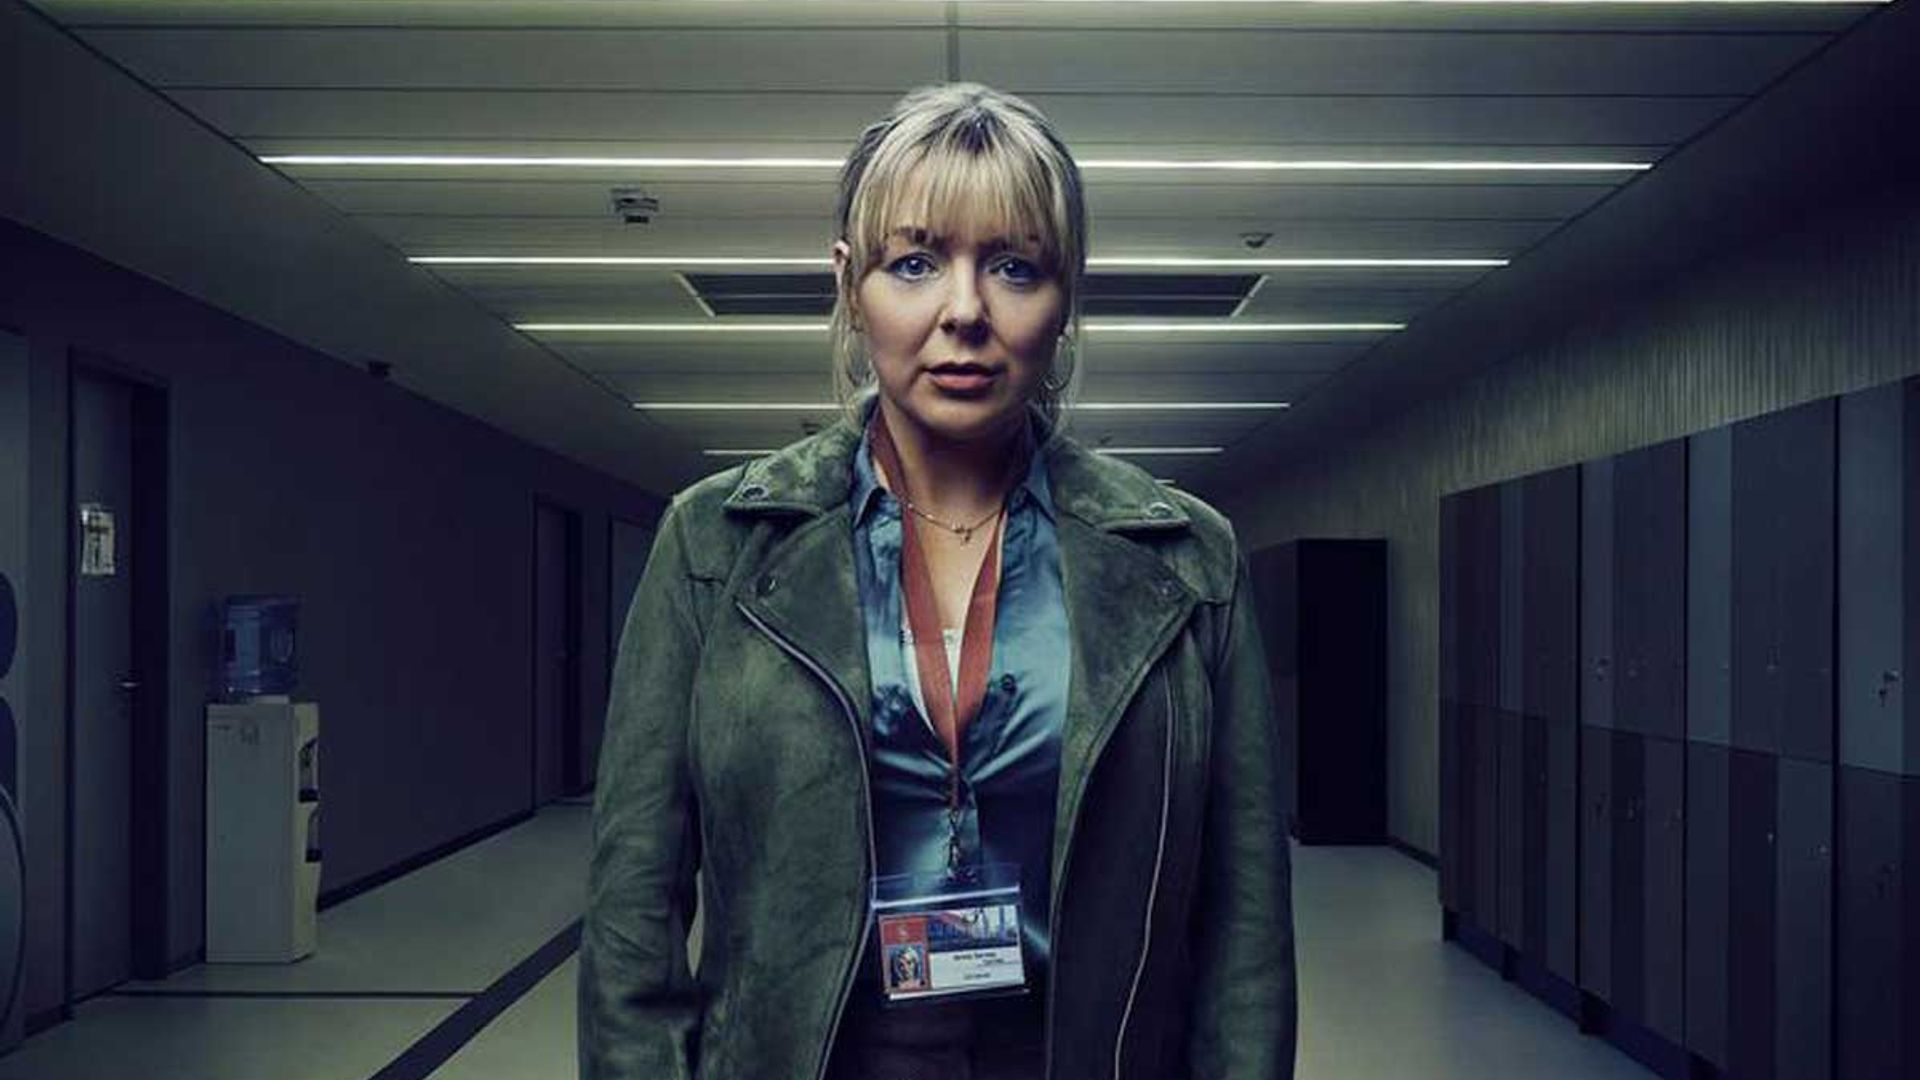 Sheridan Smith's new psychological thriller The Teacher is coming to screens this month - see the trailer